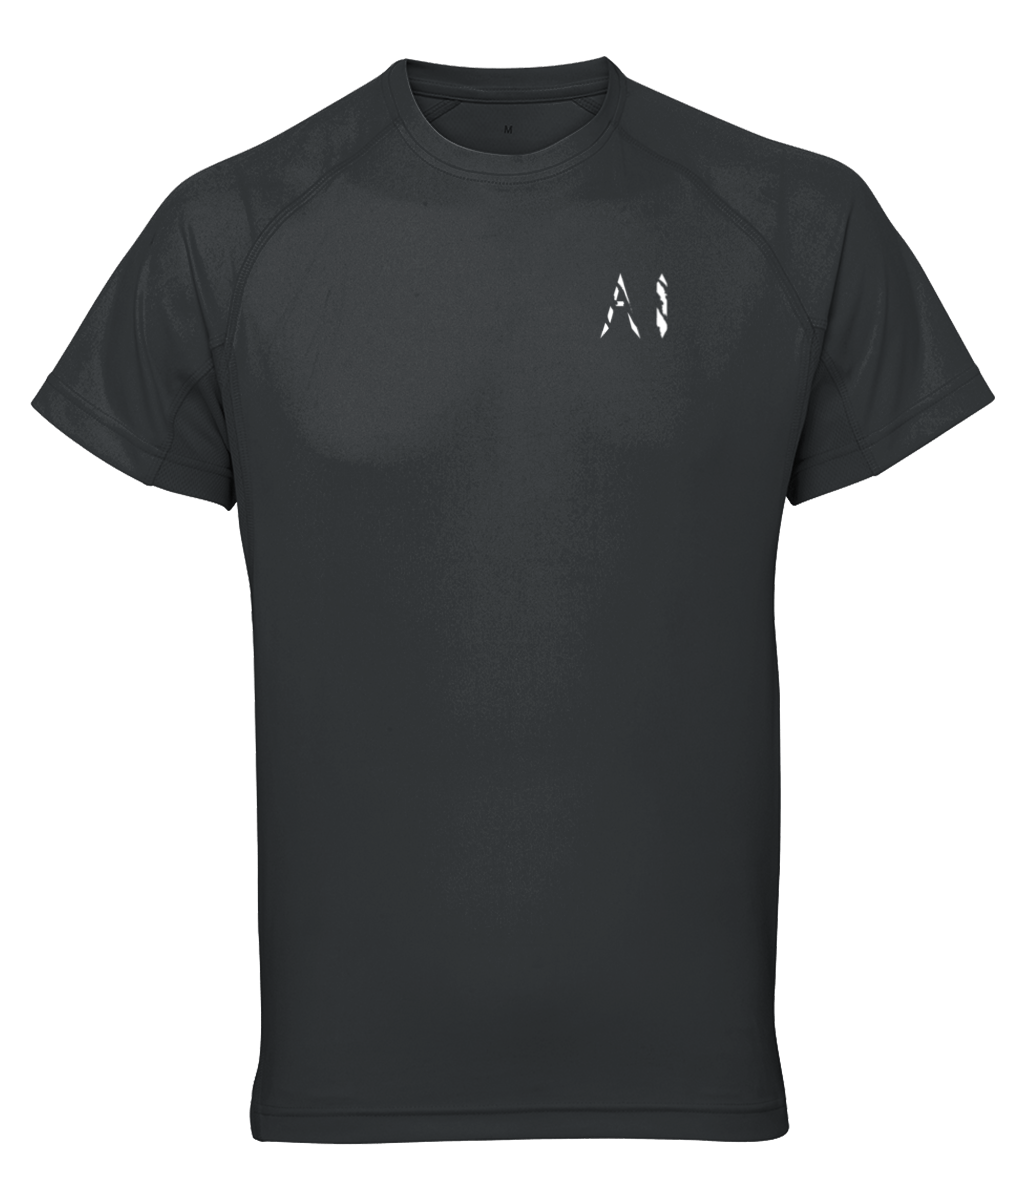 Mens charcoal Athletic Performance Top with White AI logo on the left chest